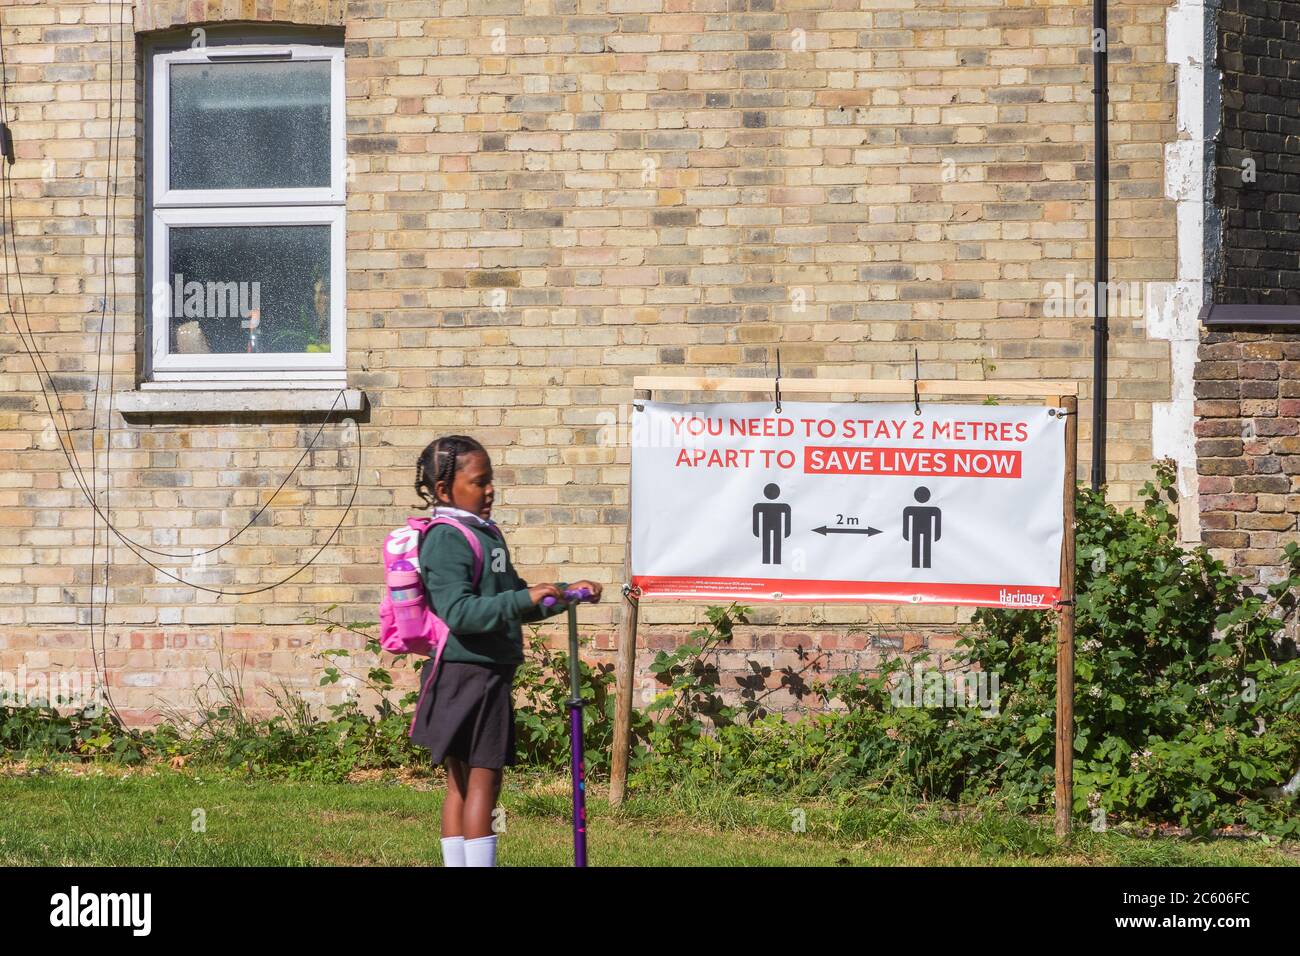 London, UK - 16 June, 2020 - Social distancing sign with an indication of 2 metres distance in a park with a girl riding a scooter through Stock Photo